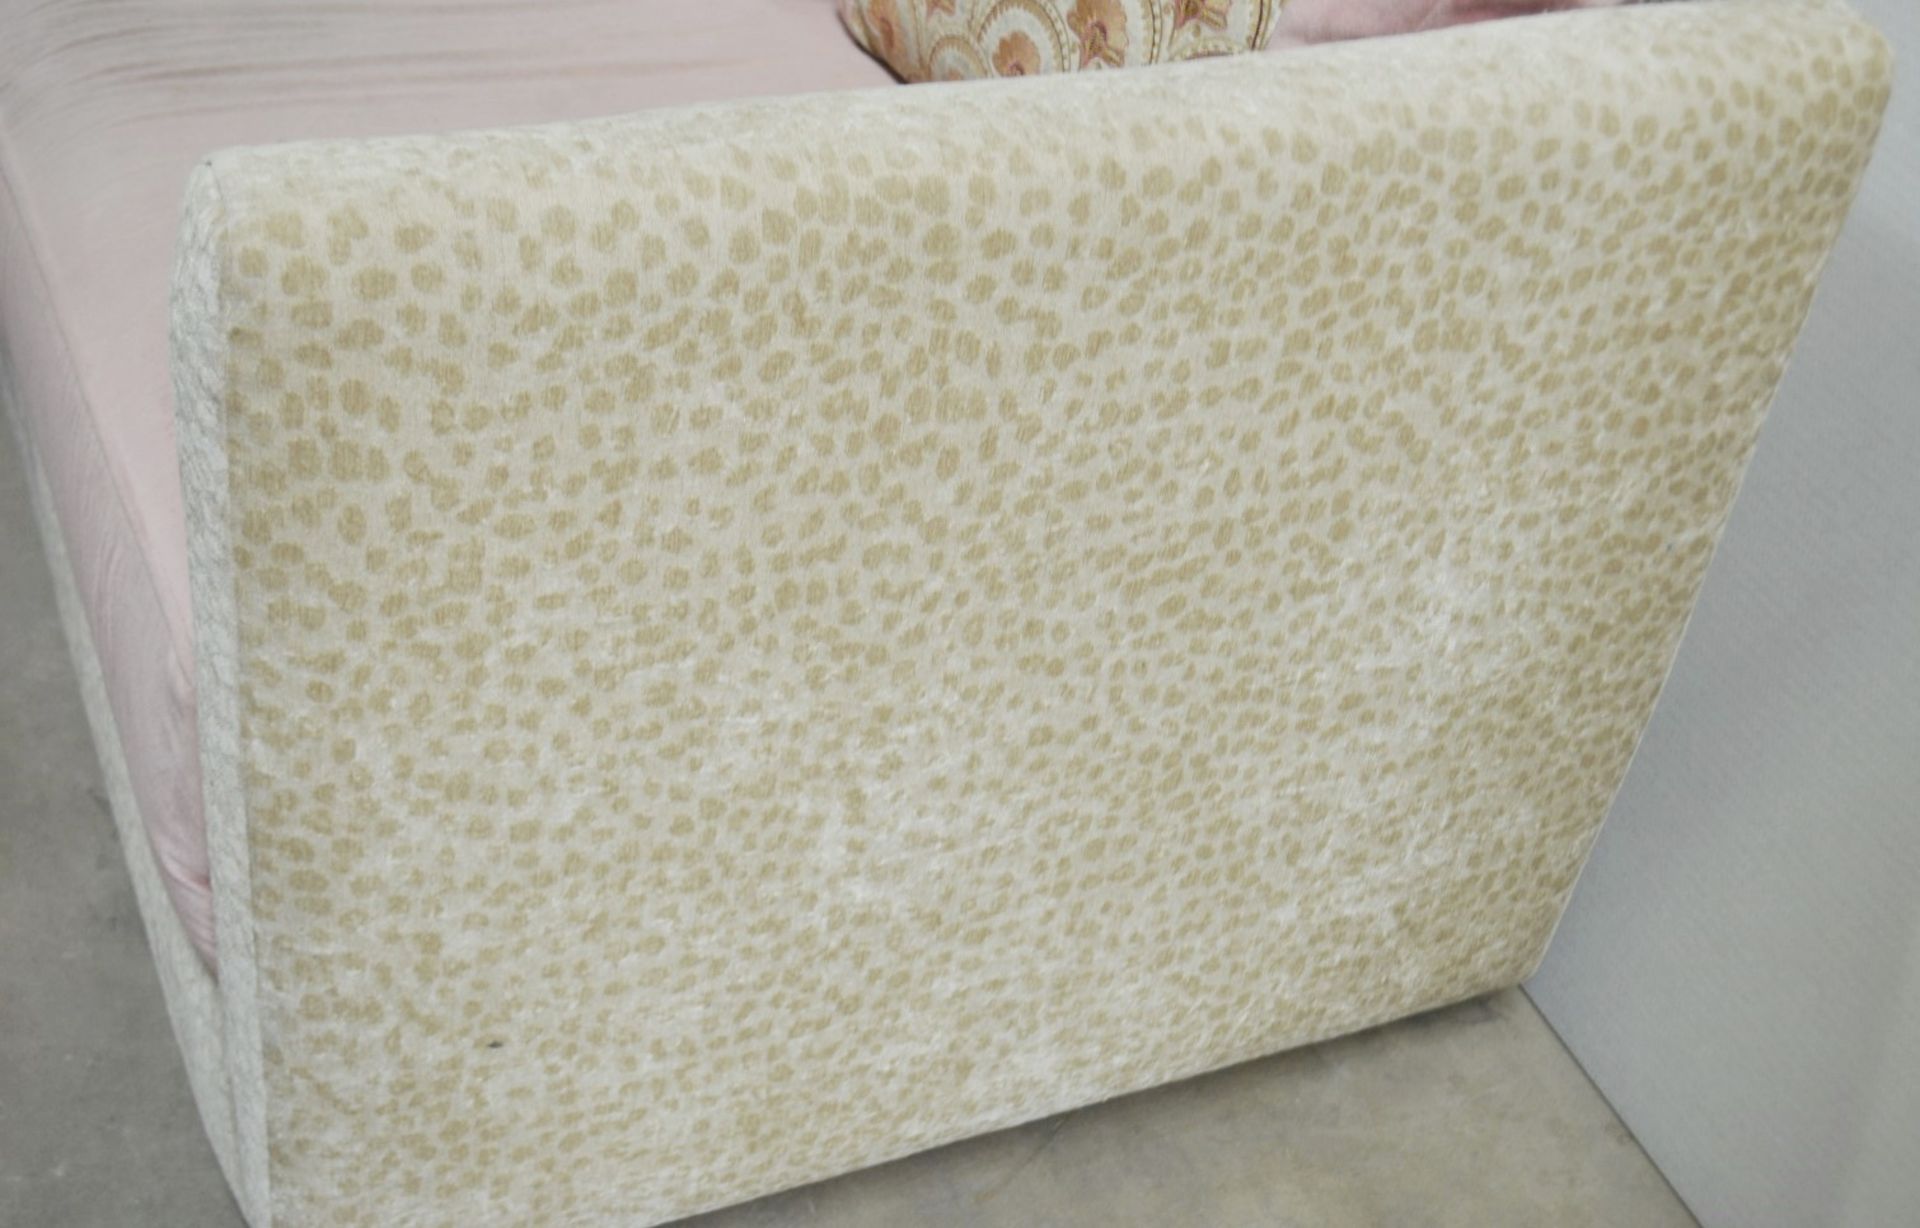 1 x Upholstered Sofa With 3 x Cushions, Pale Pink Seat Cushion With Matching Footstool - Ref: HMS104 - Image 3 of 5